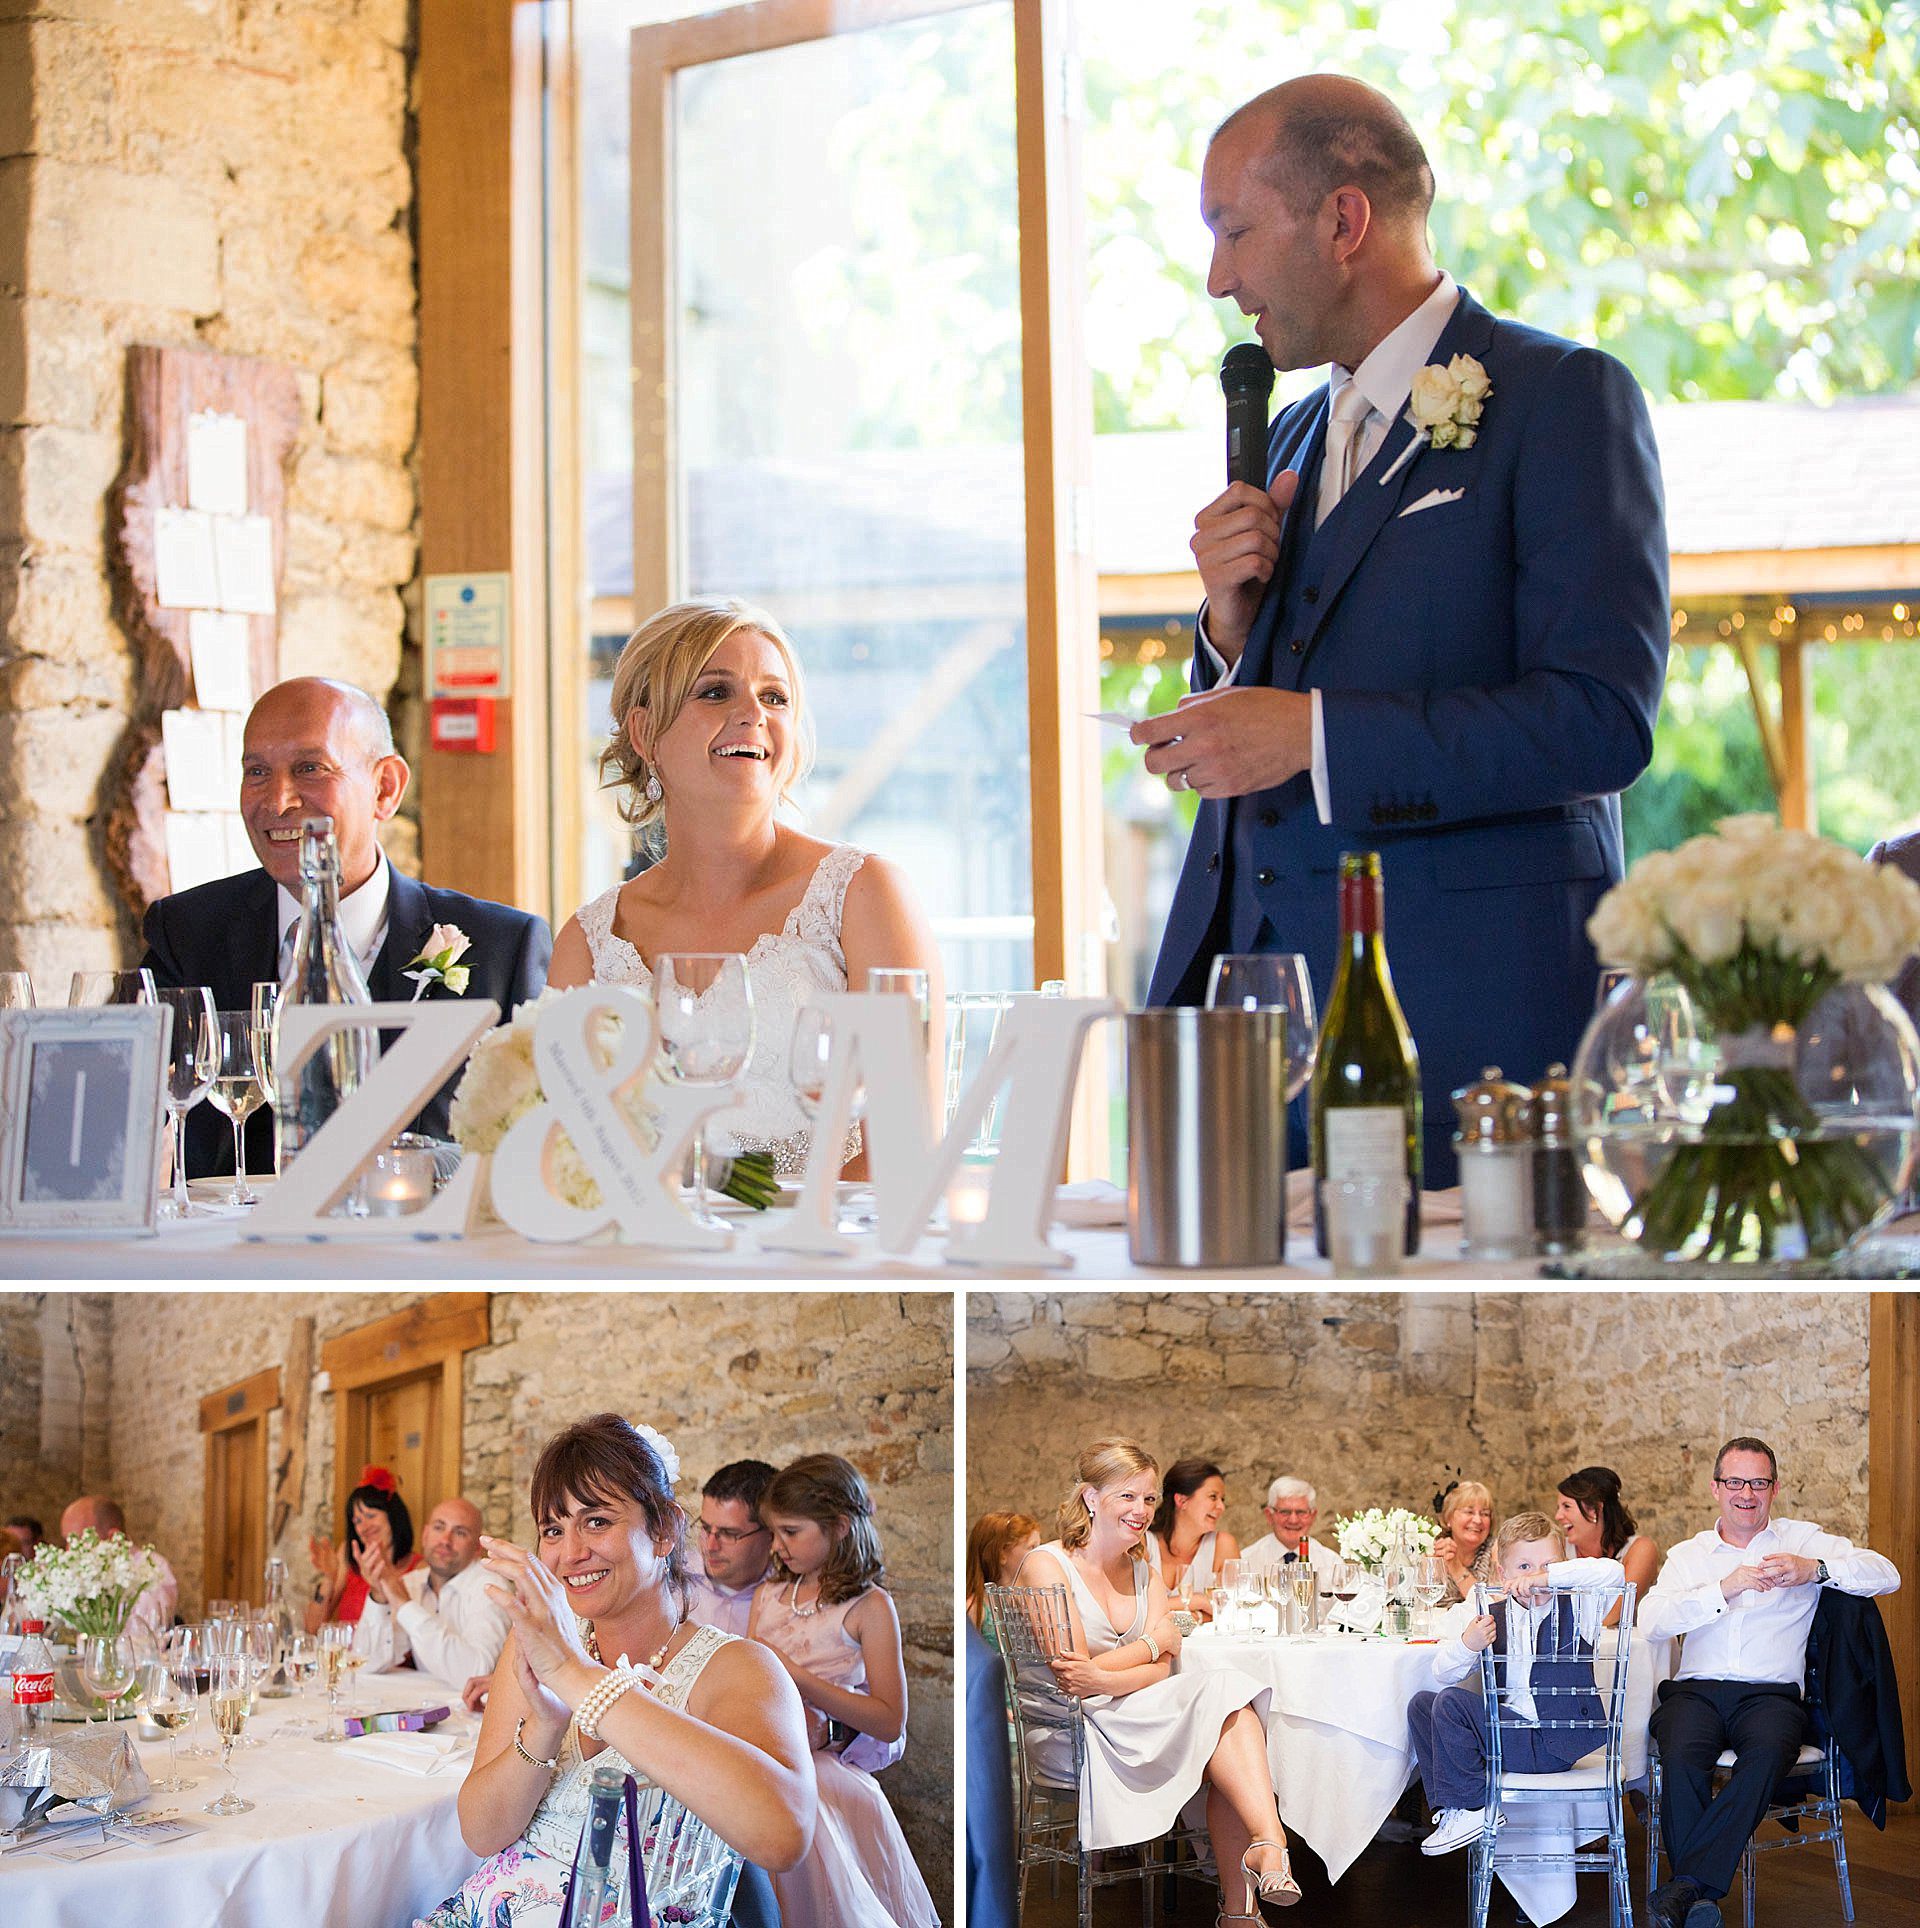 The speeches - Zoe and Mike